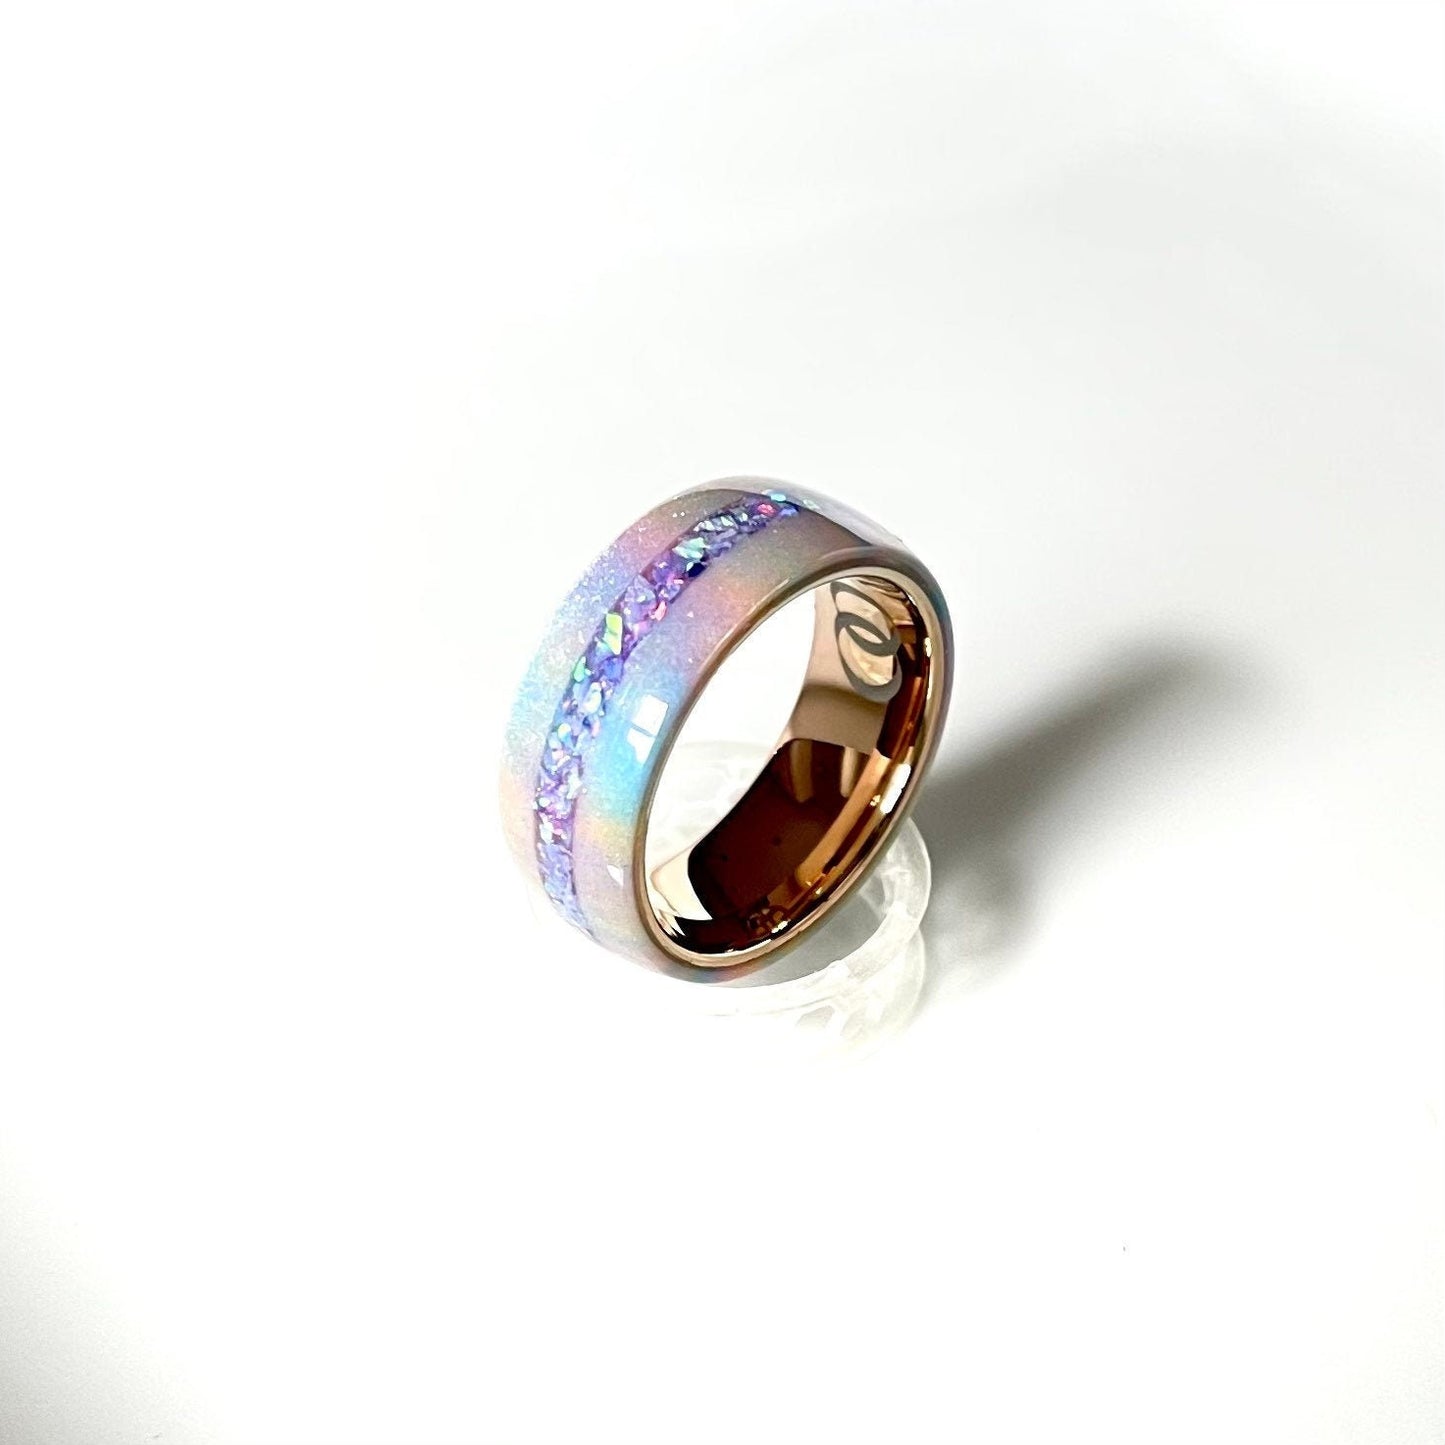 8mm Unicorn Ring with Opal Accent